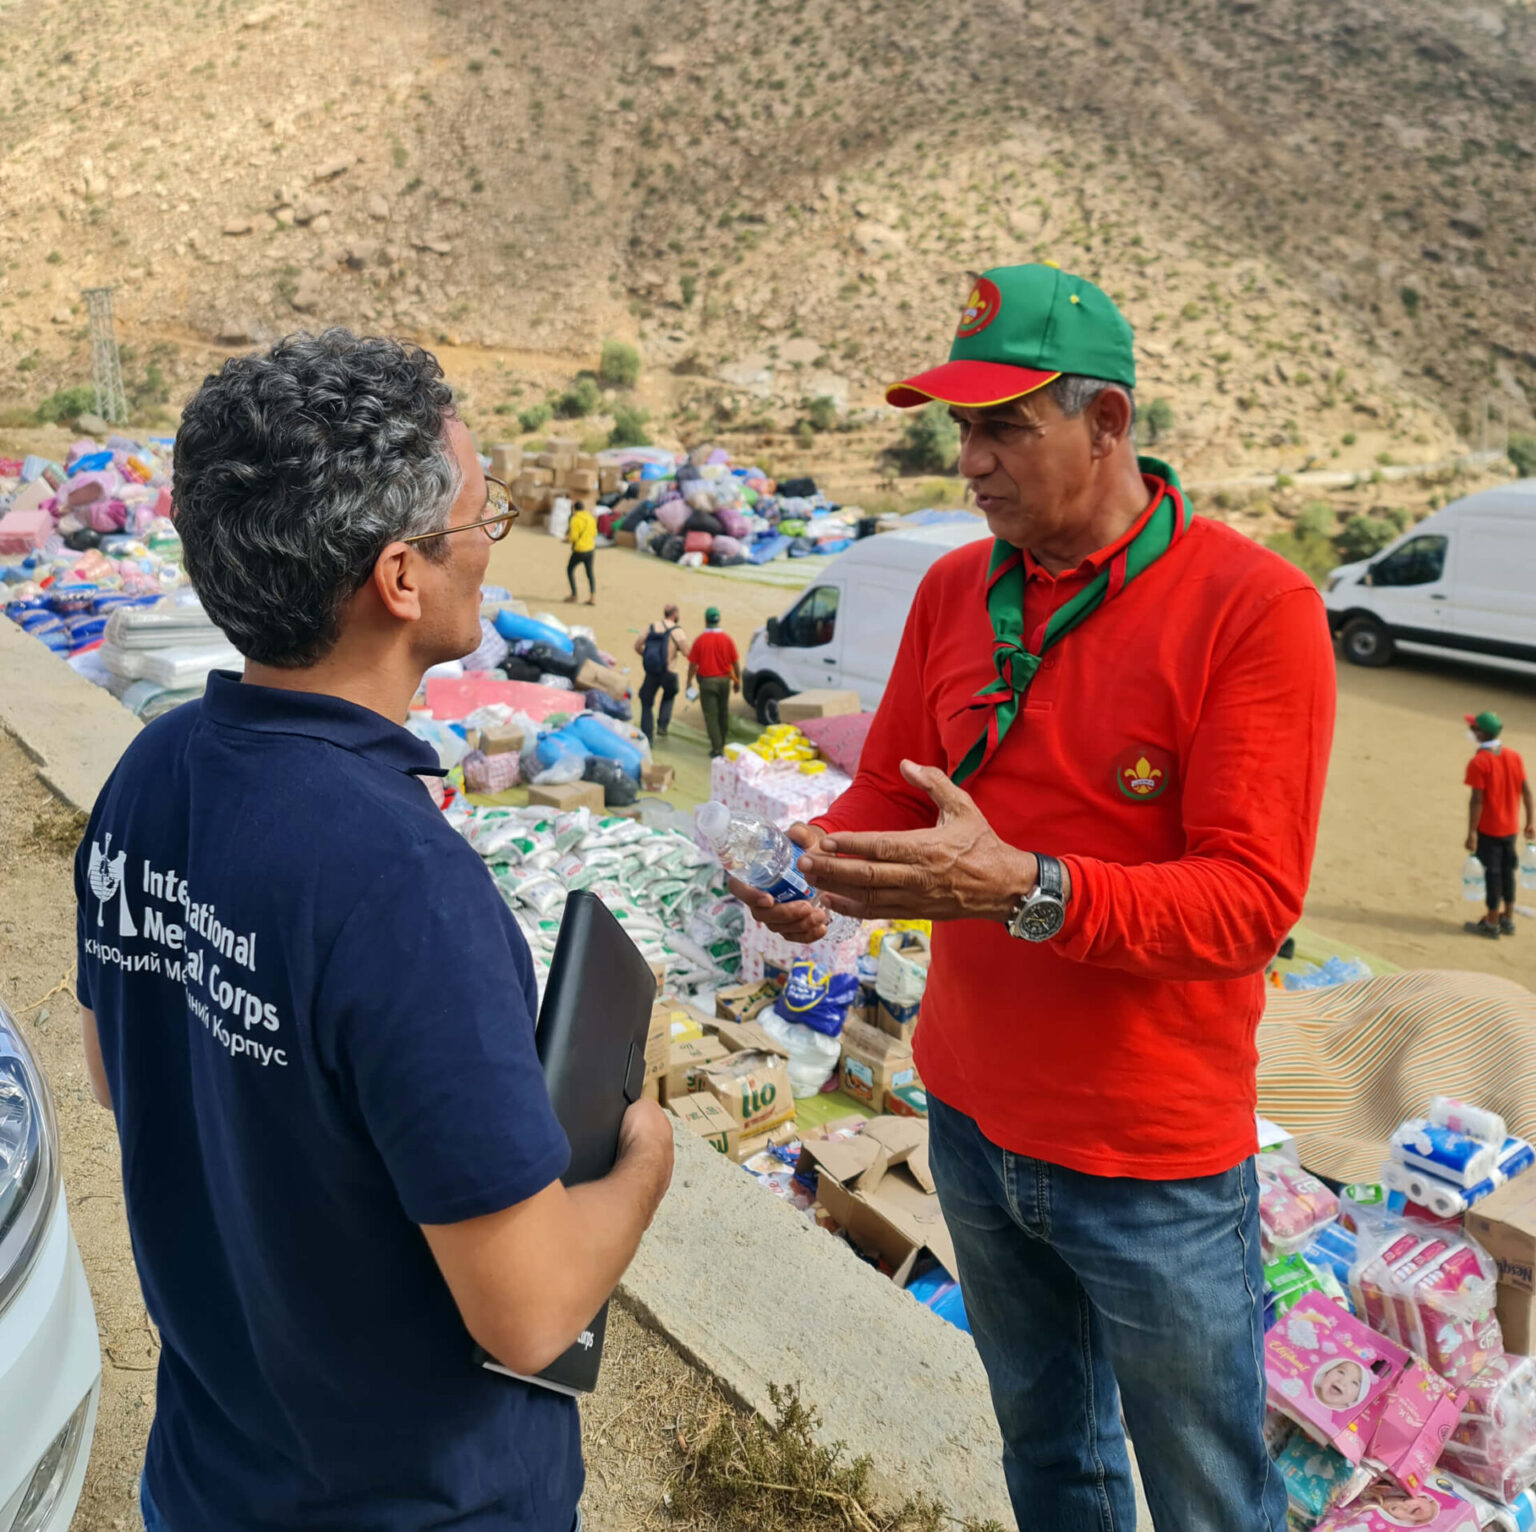 International Medical Corps is partnering with local organizations to distribute hygiene kits, family tents, solar kits, plastic sheeting, and winter clothing and shoes to support affected communities.International Medical Corps’ Emergency Response Team Medical Coordinator meets with a member of the Scouts of Morocco at the distribution in Falghous.